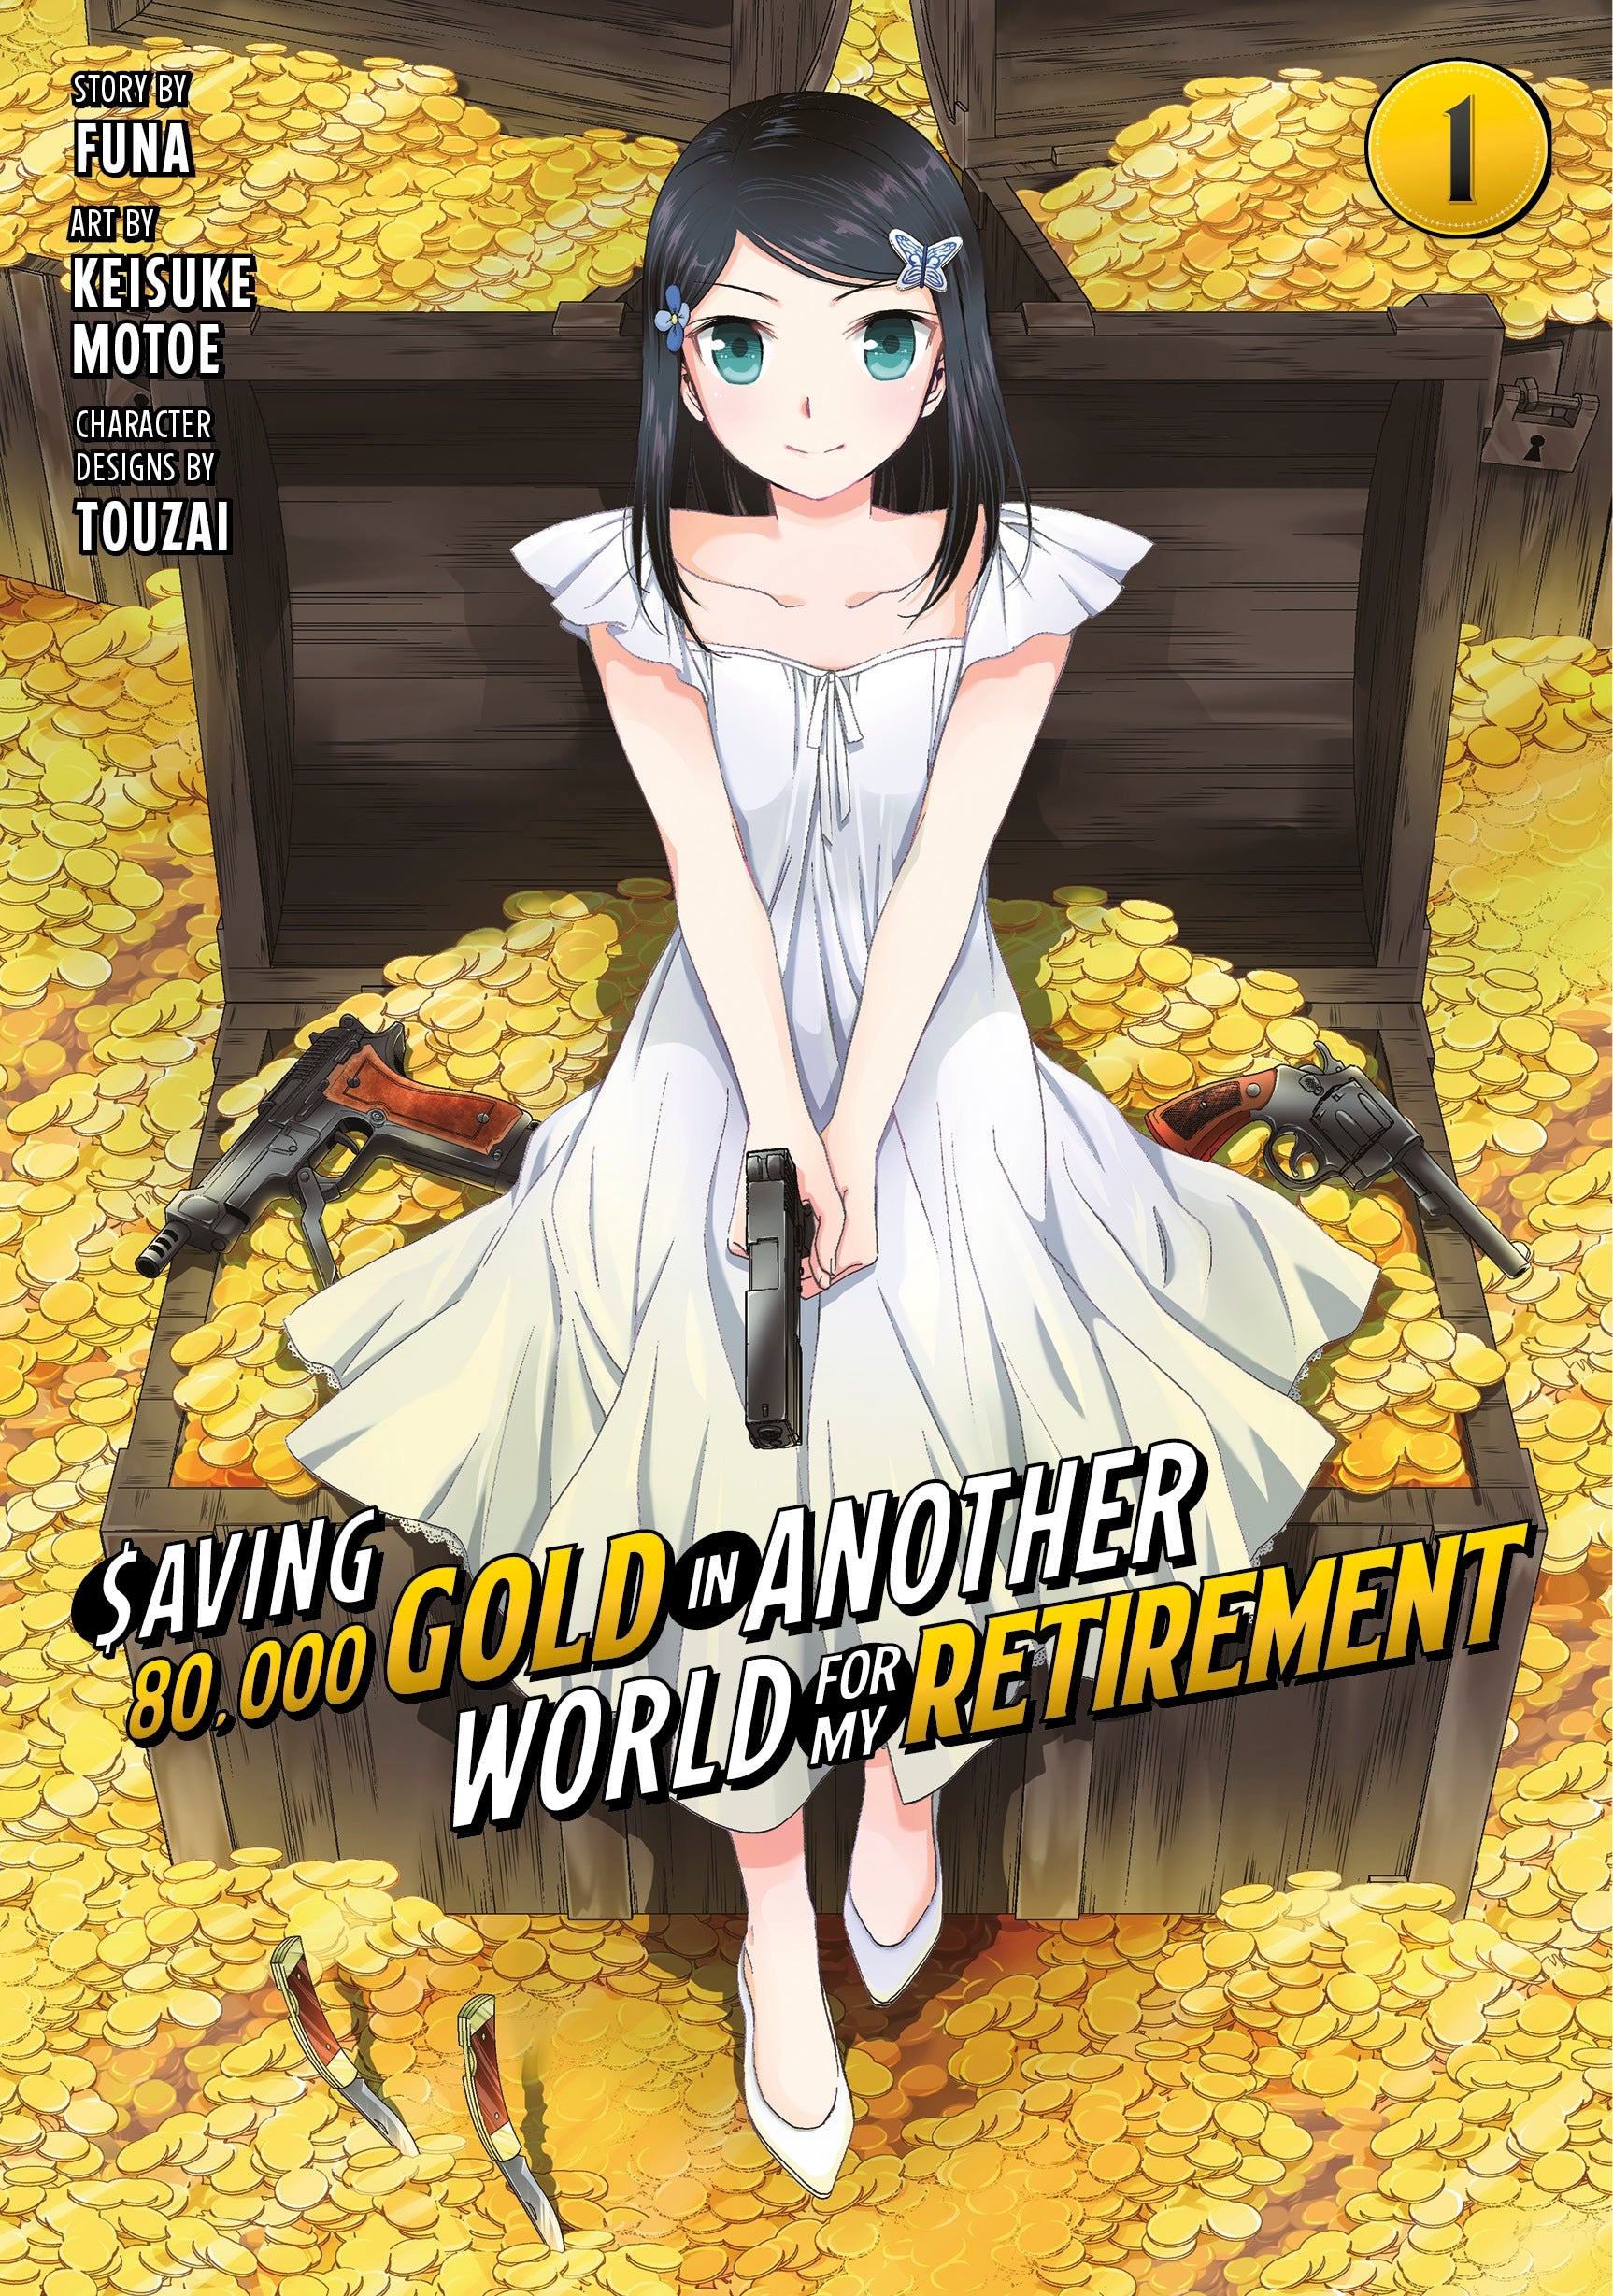 Saving 80,000 Gold in Another World for My Retirement, Vol. 1 (Manga)